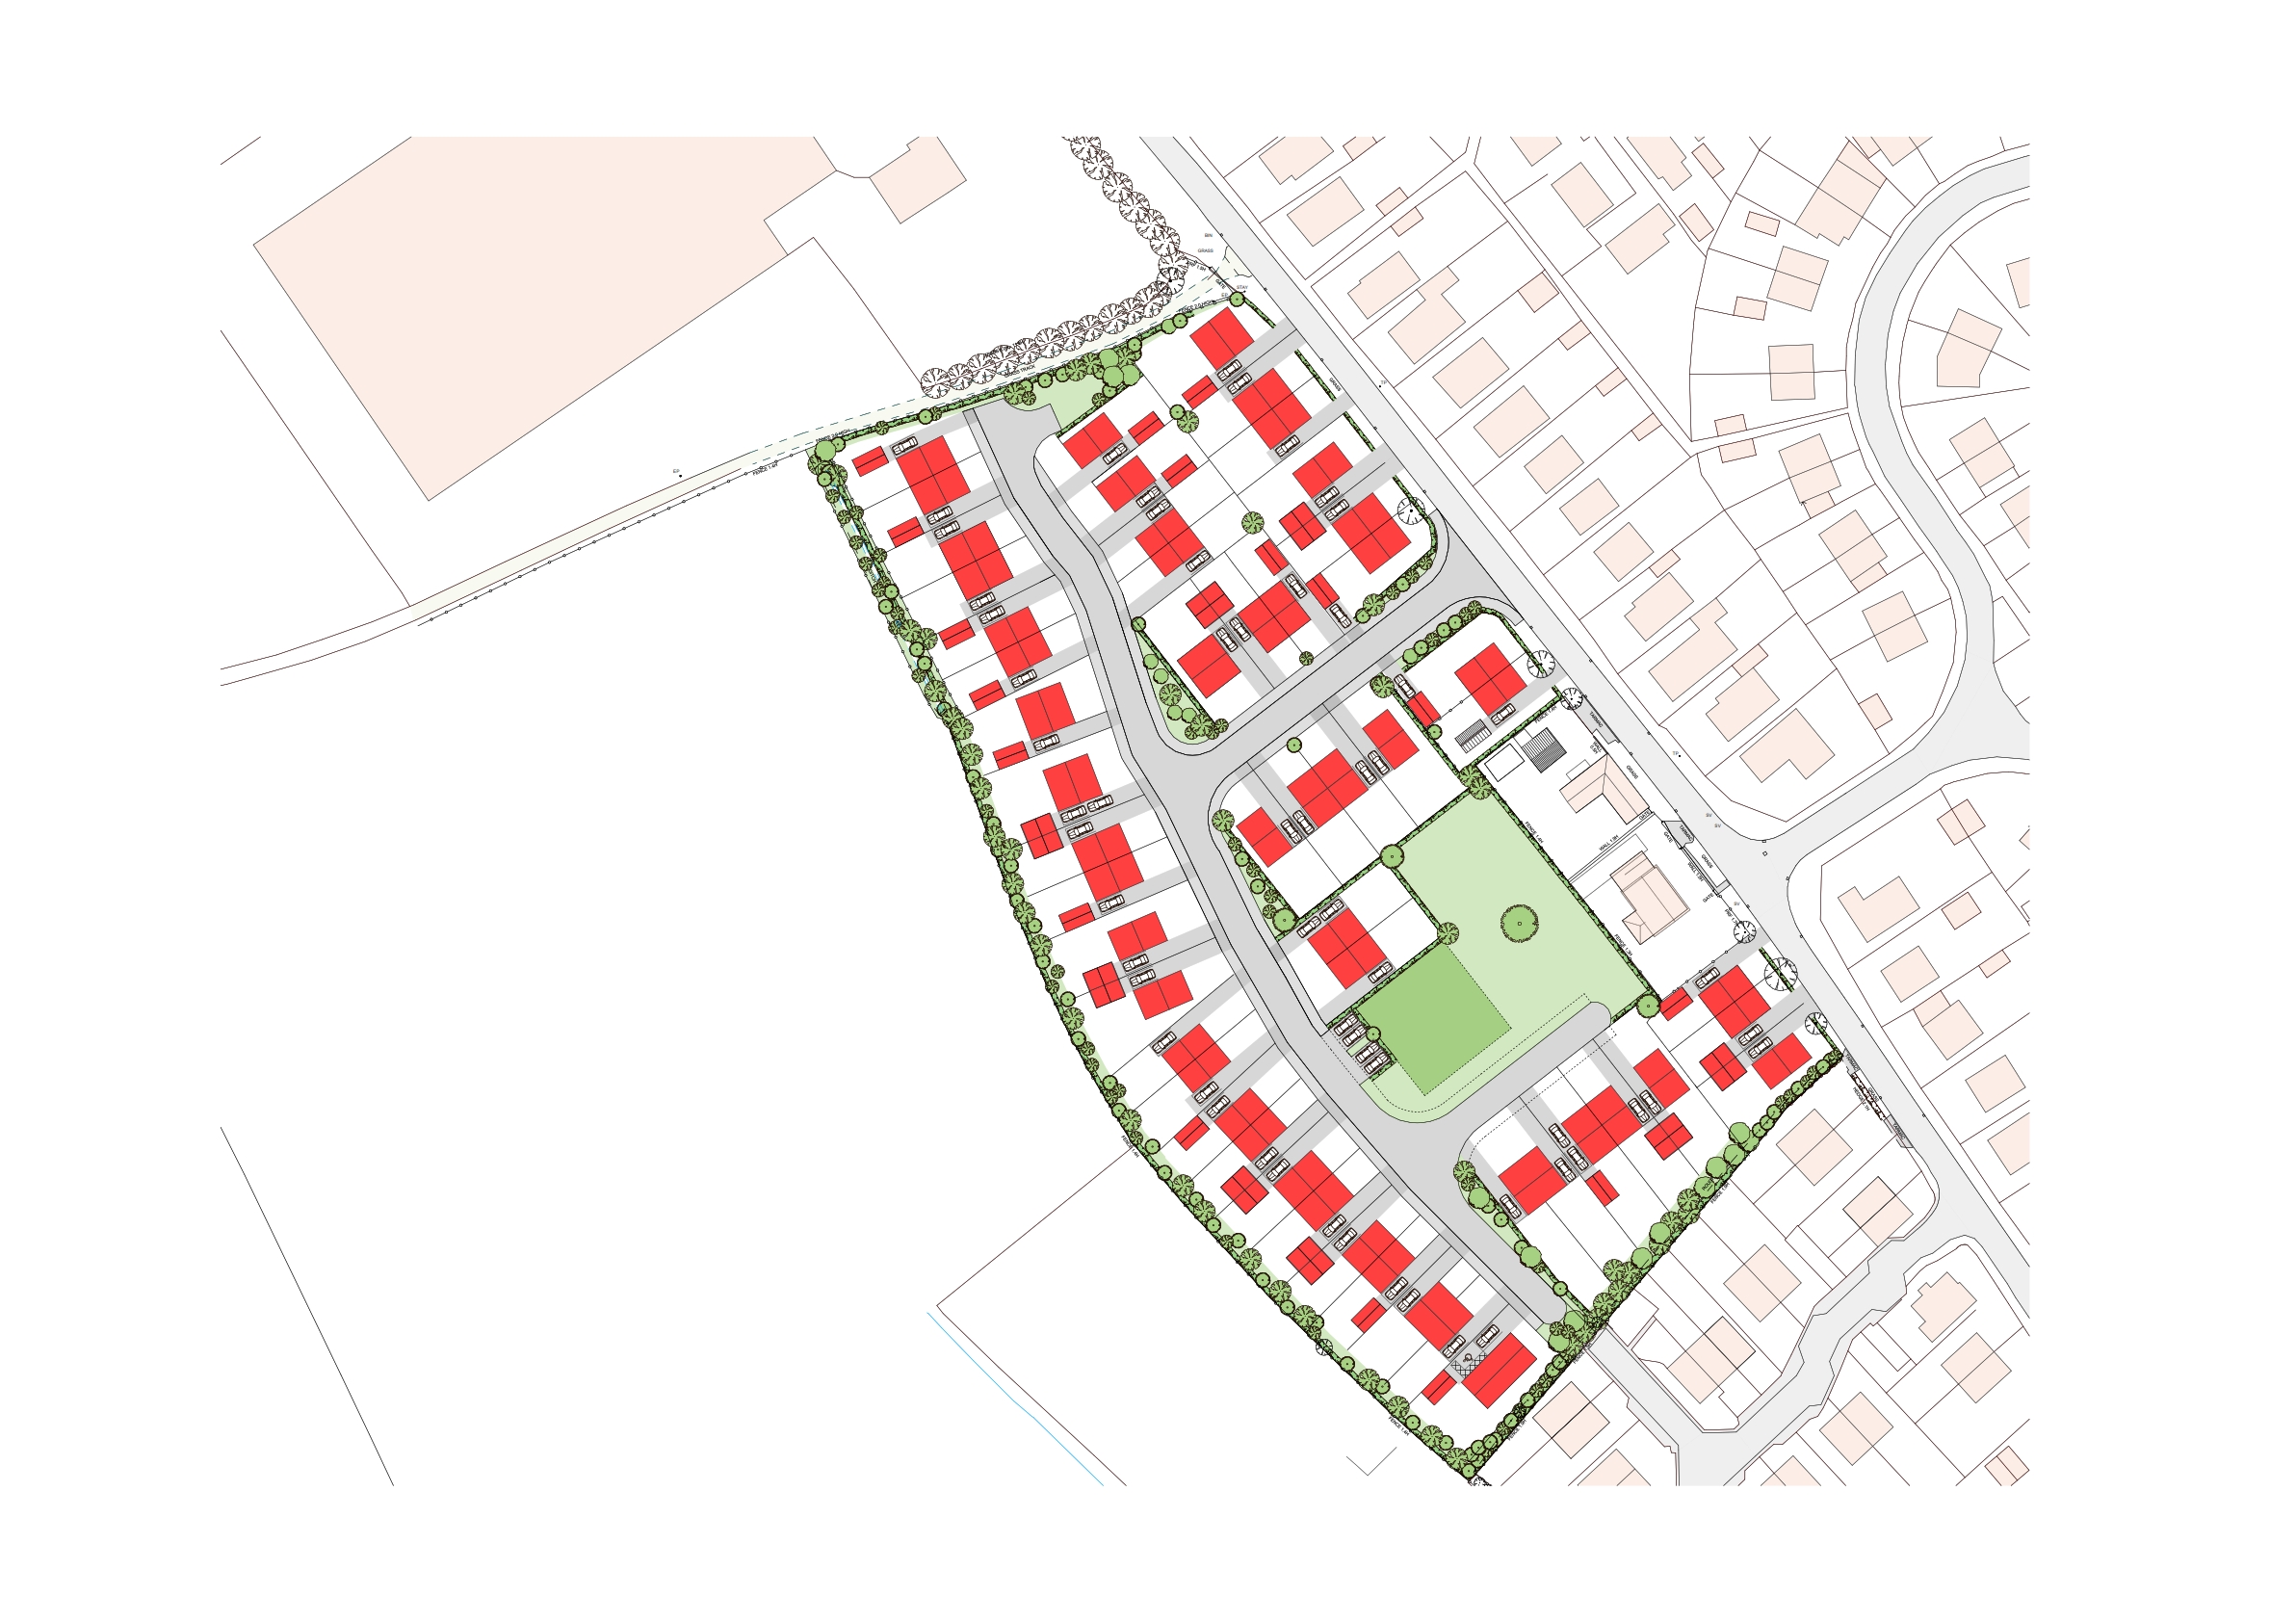 Outline Permission for 52 Houses